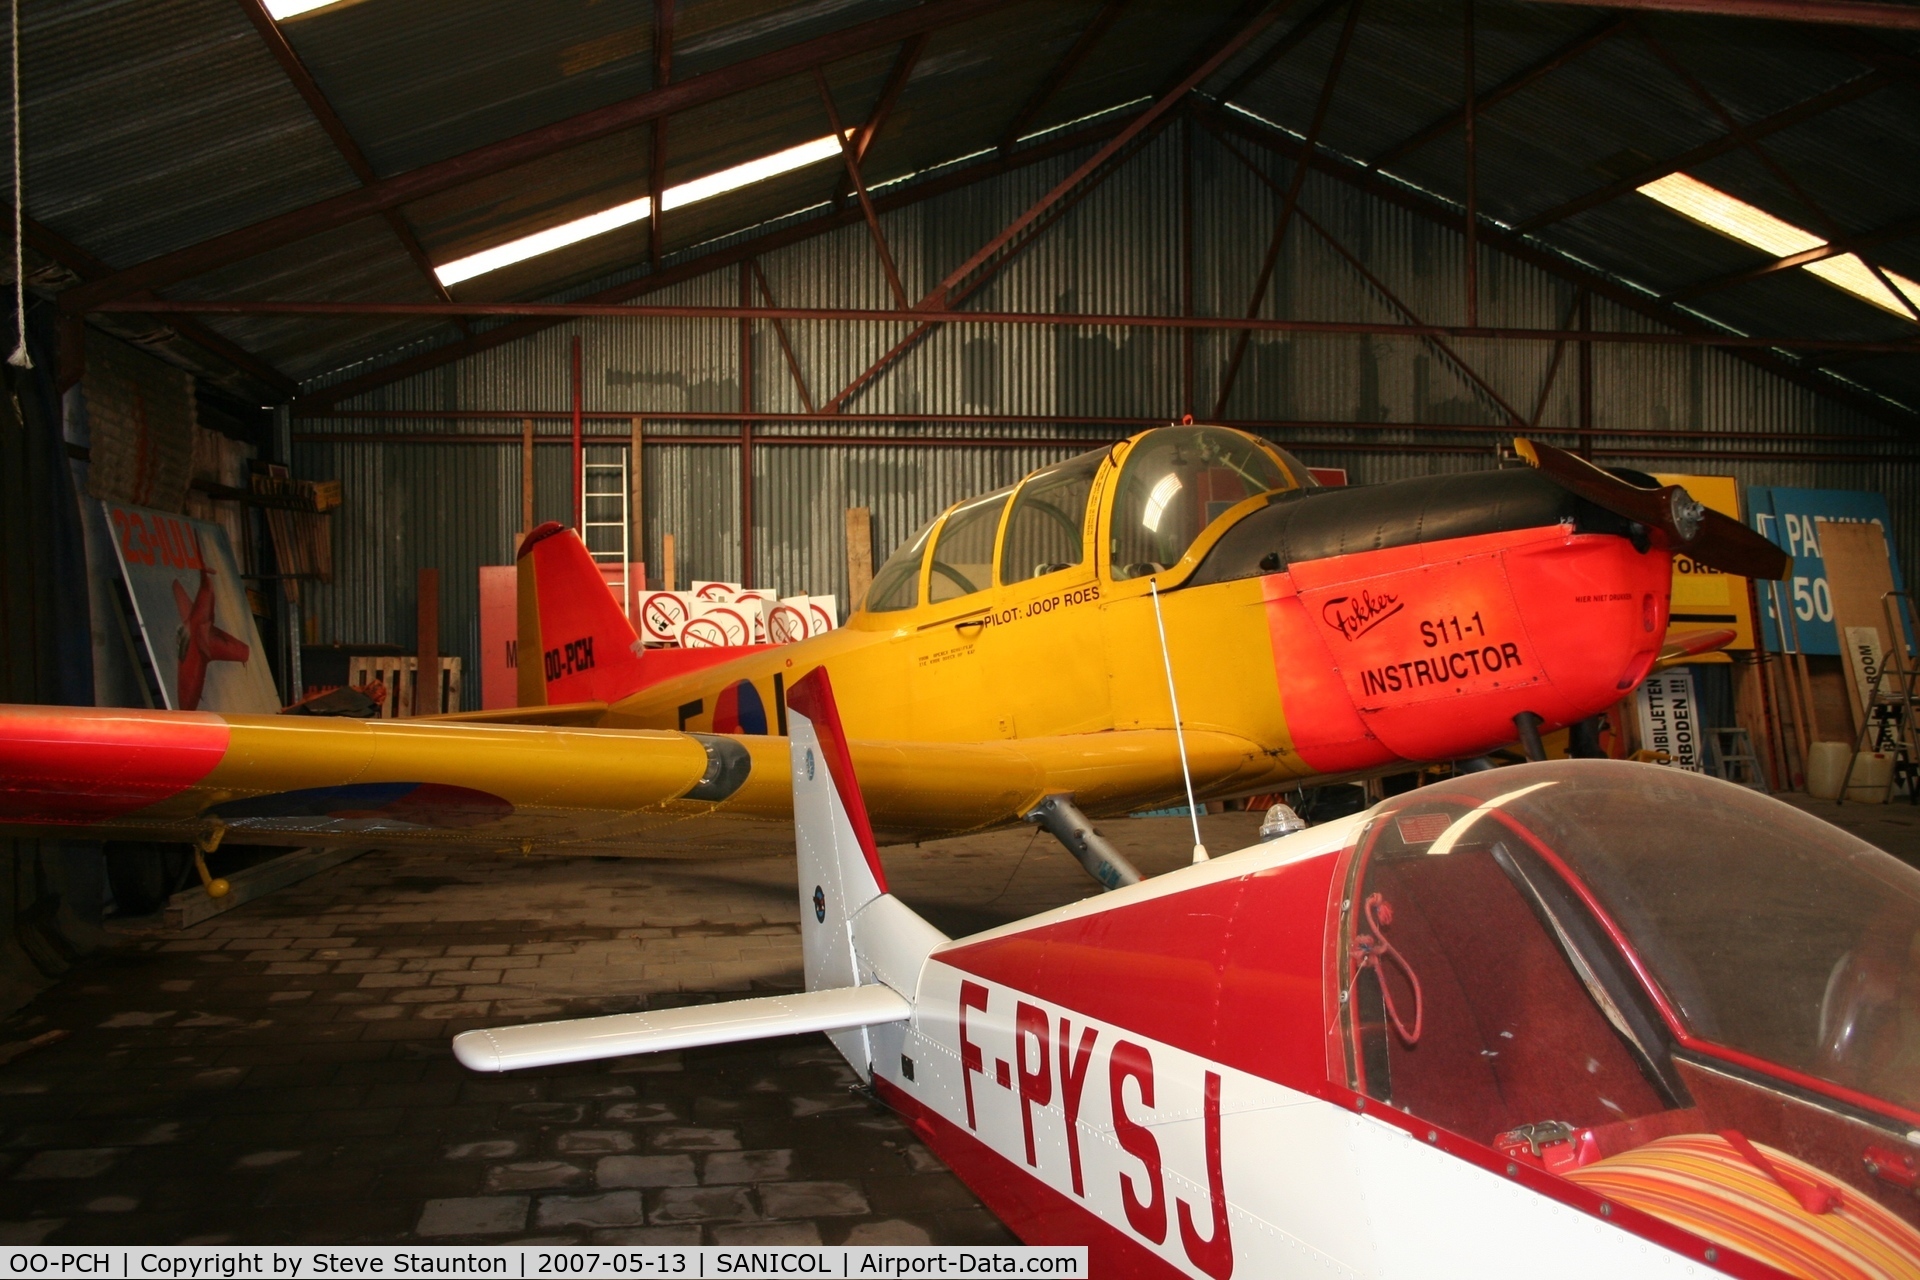 OO-PCH, Fokker S.11-1 Instructor C/N 6199, Taken on an Aerporint tour @ Sanicol